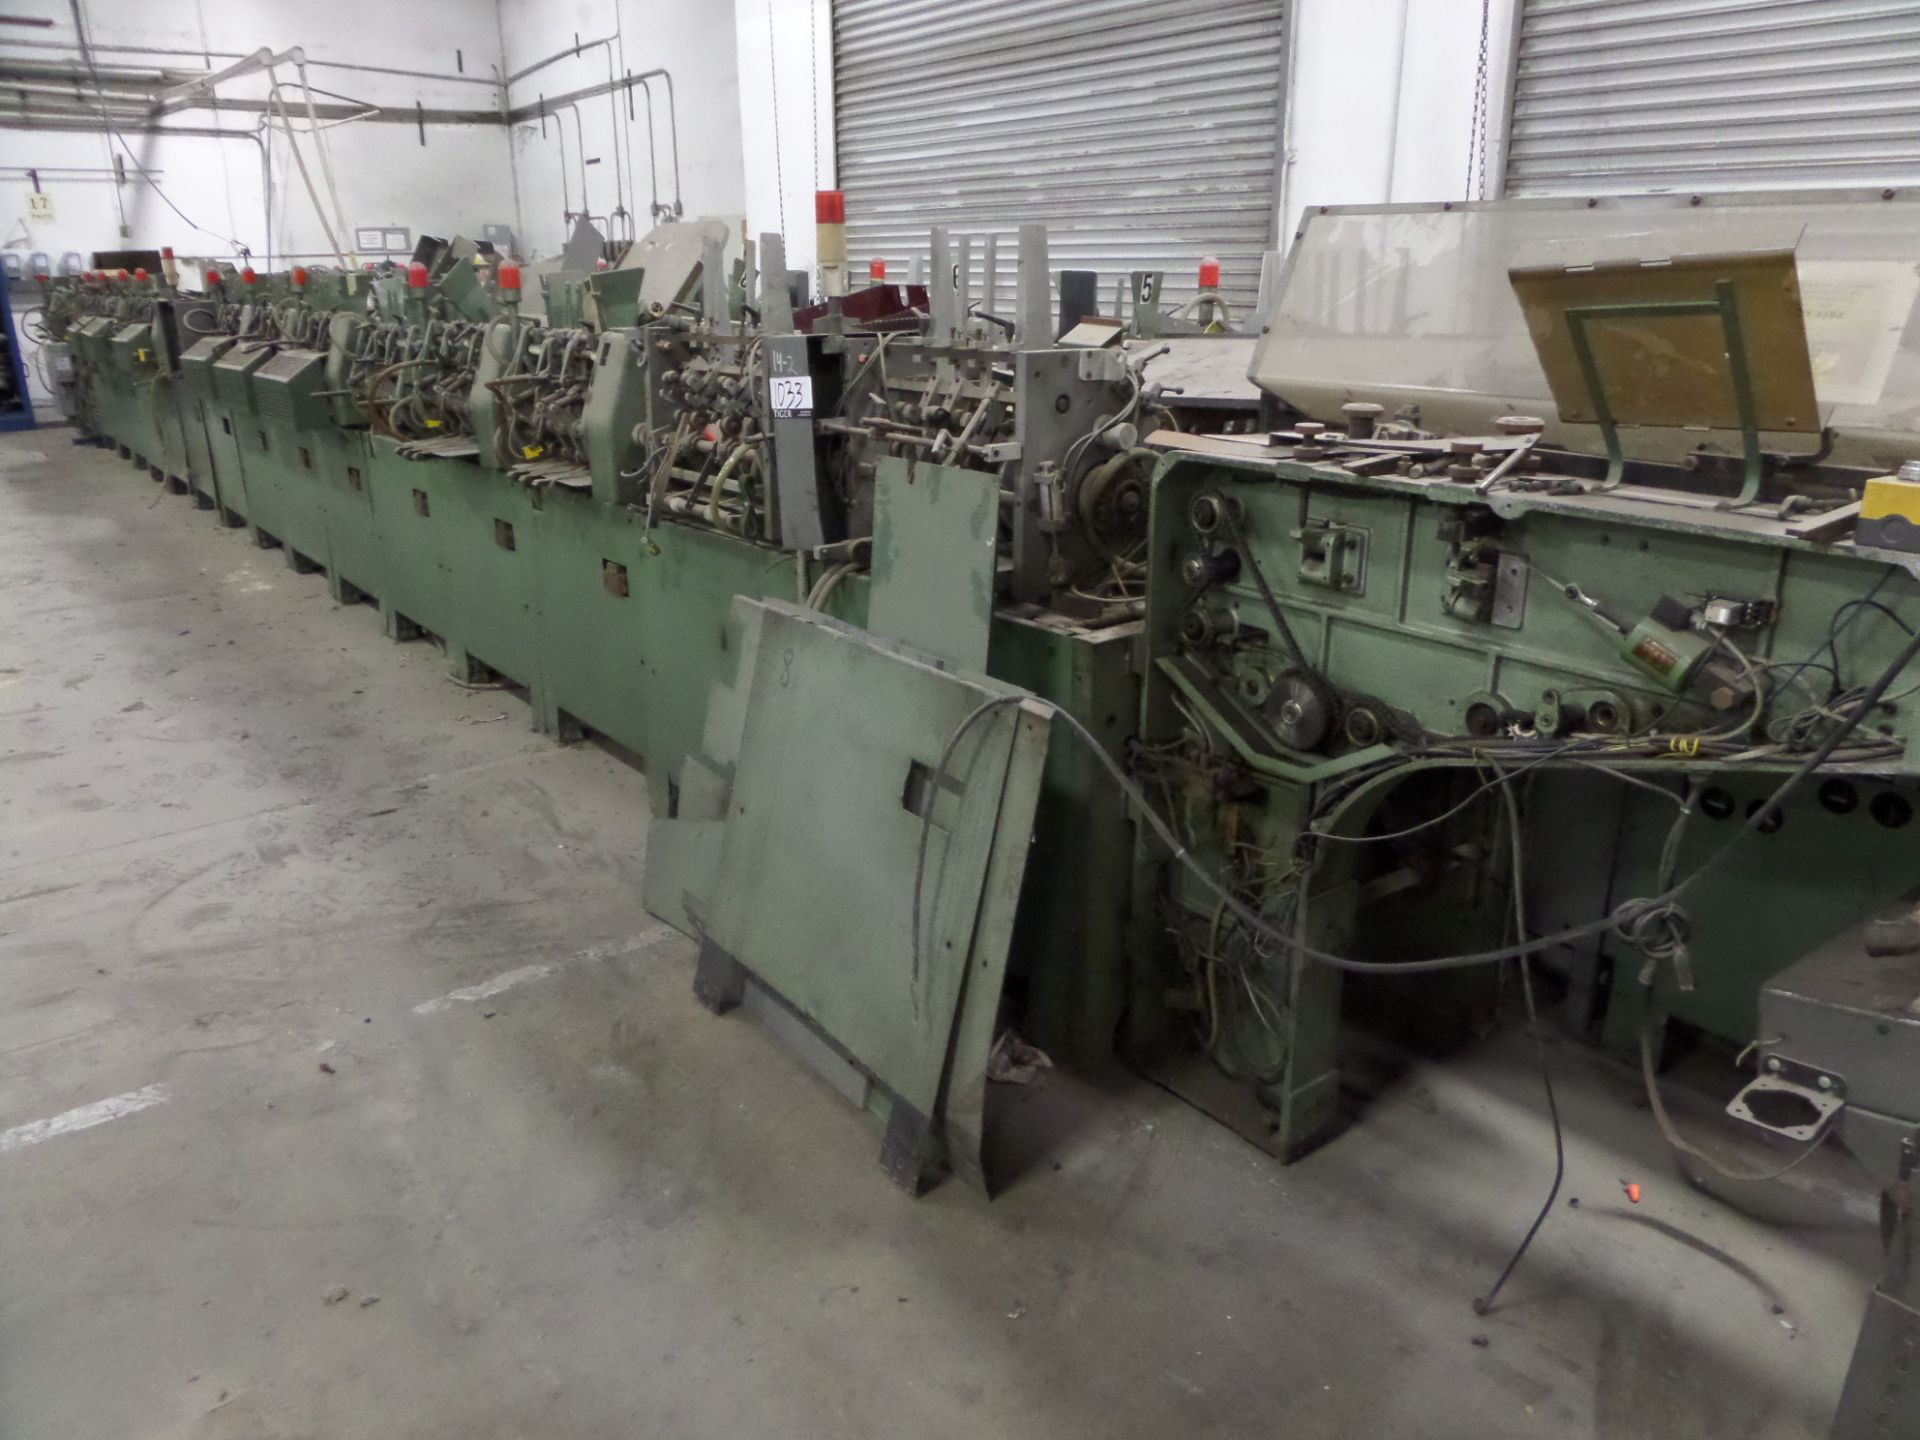 Muller 227 News Paper Inserter with 17 Pockets (Partially Disassembled). Asset Location: